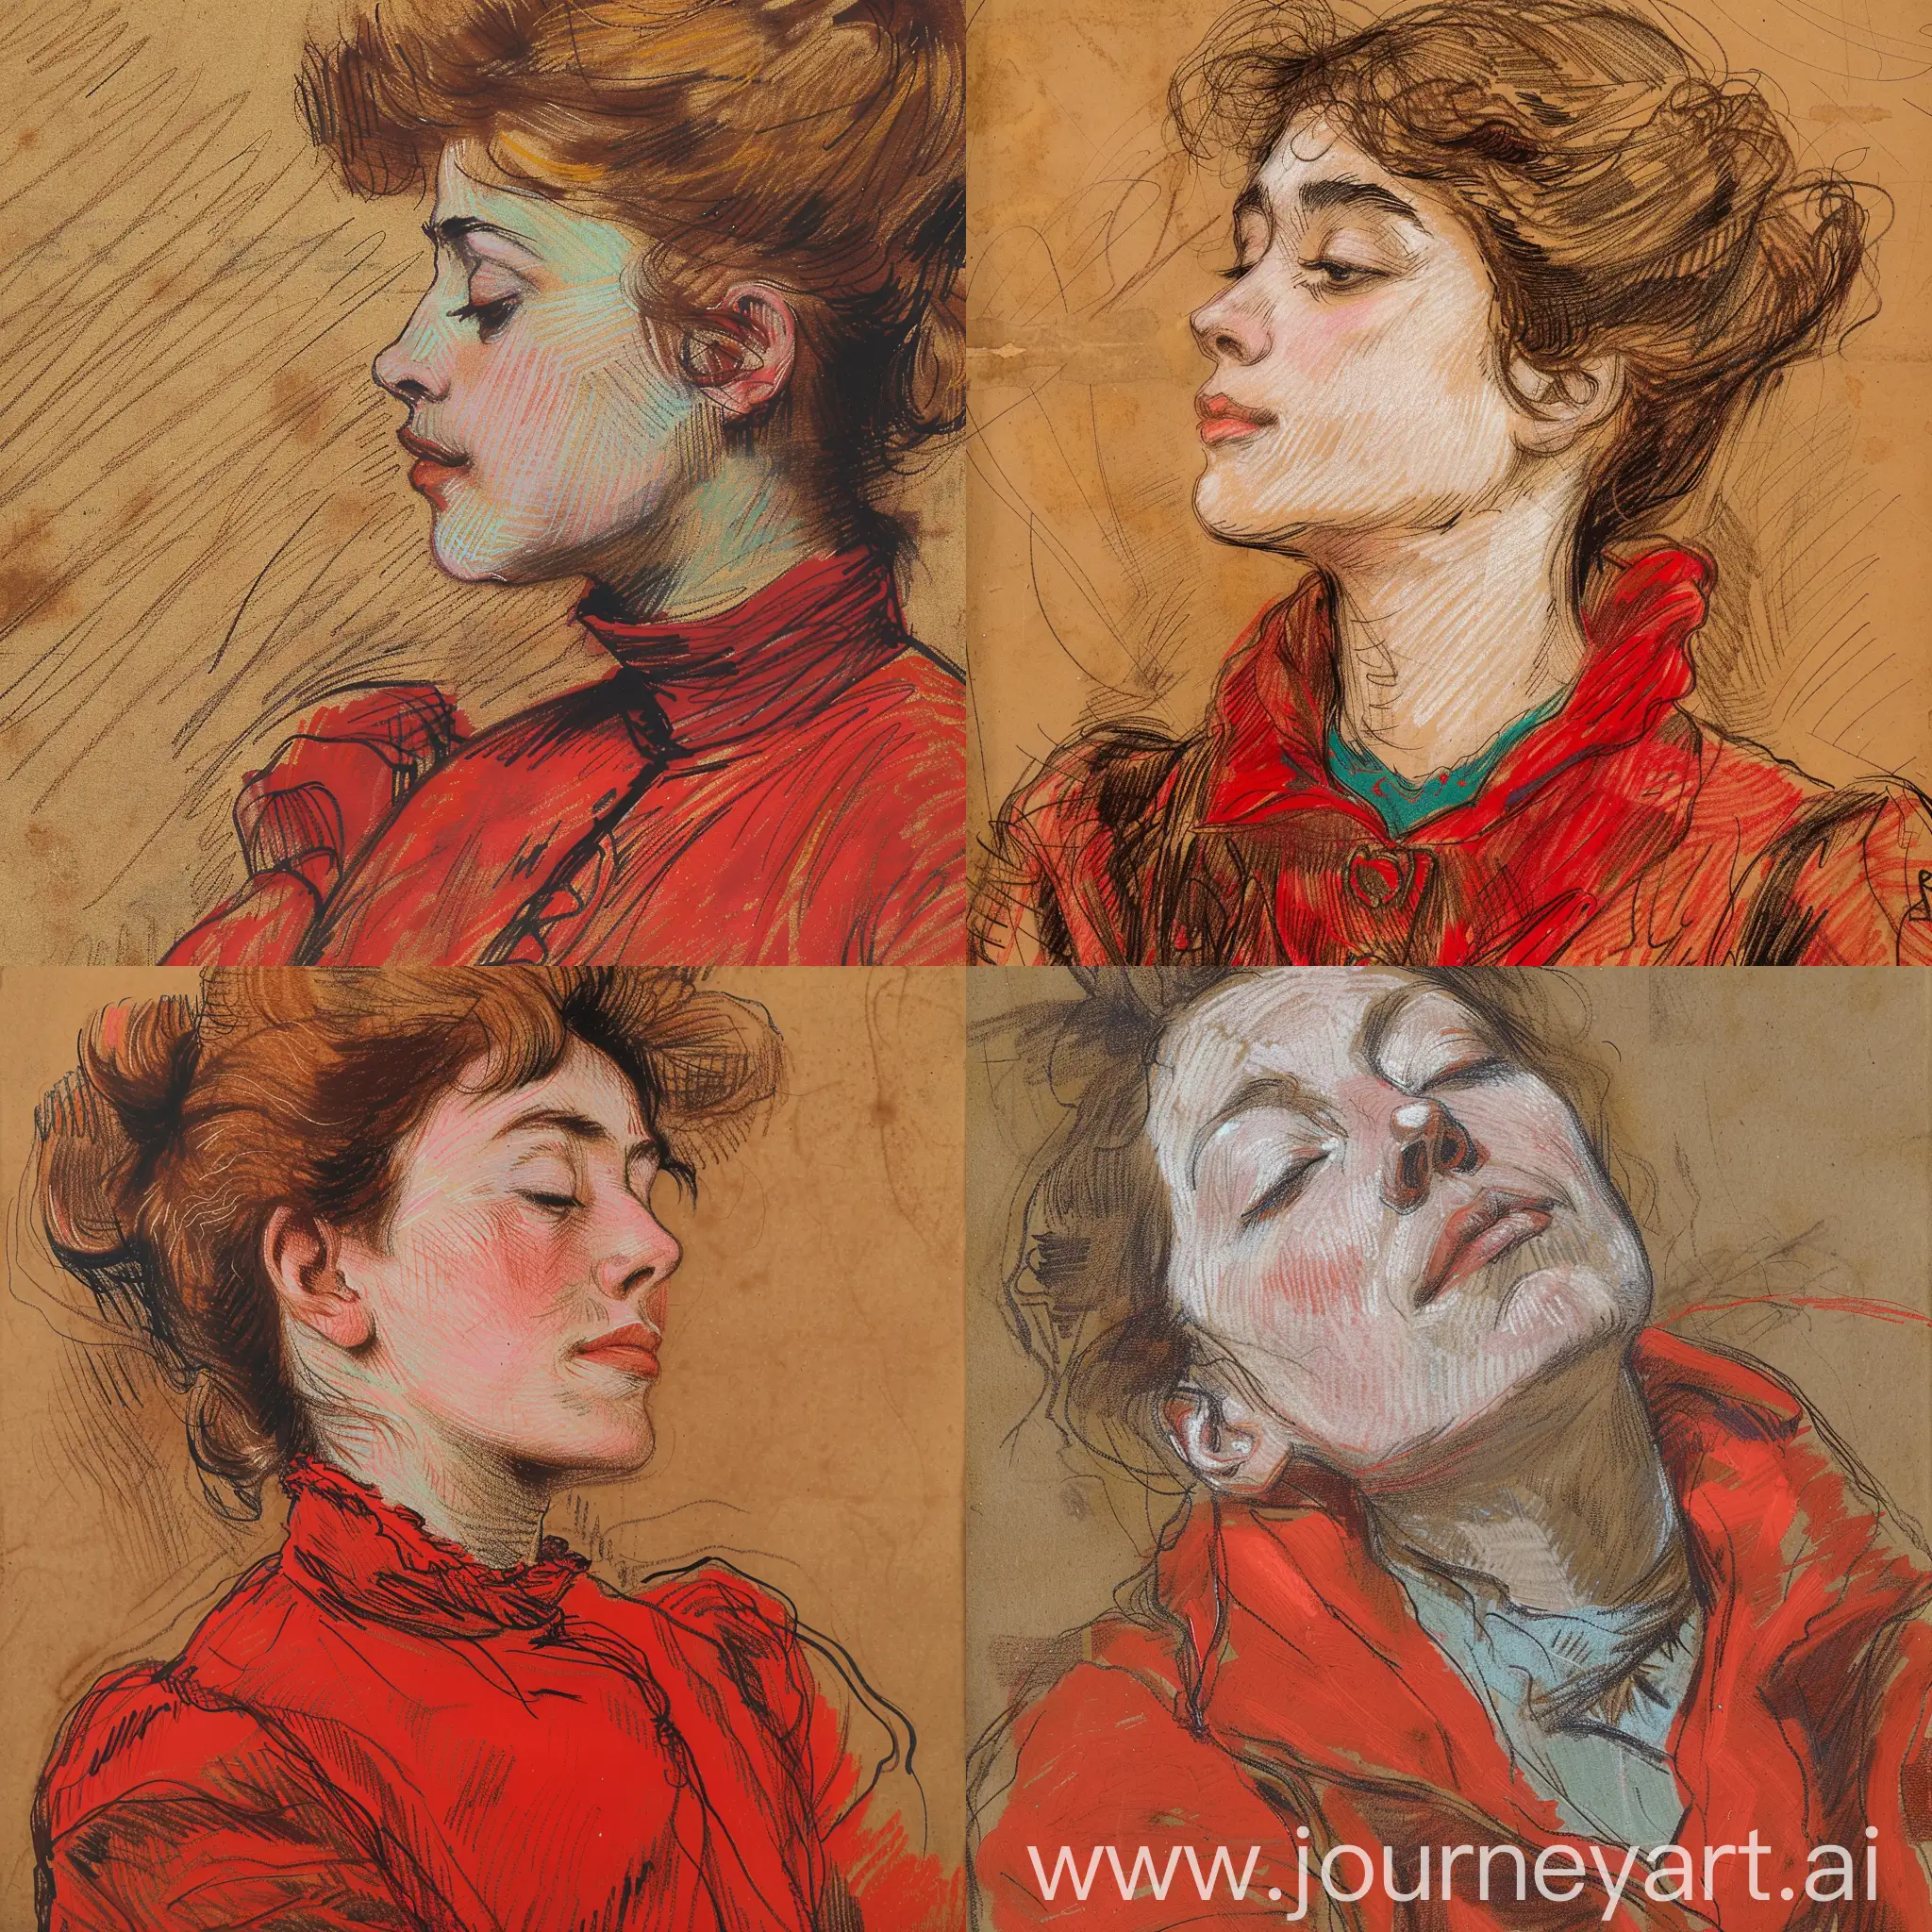 1889's rought coal draft closeup european woman in red on brown background by Toulouse Lautrec